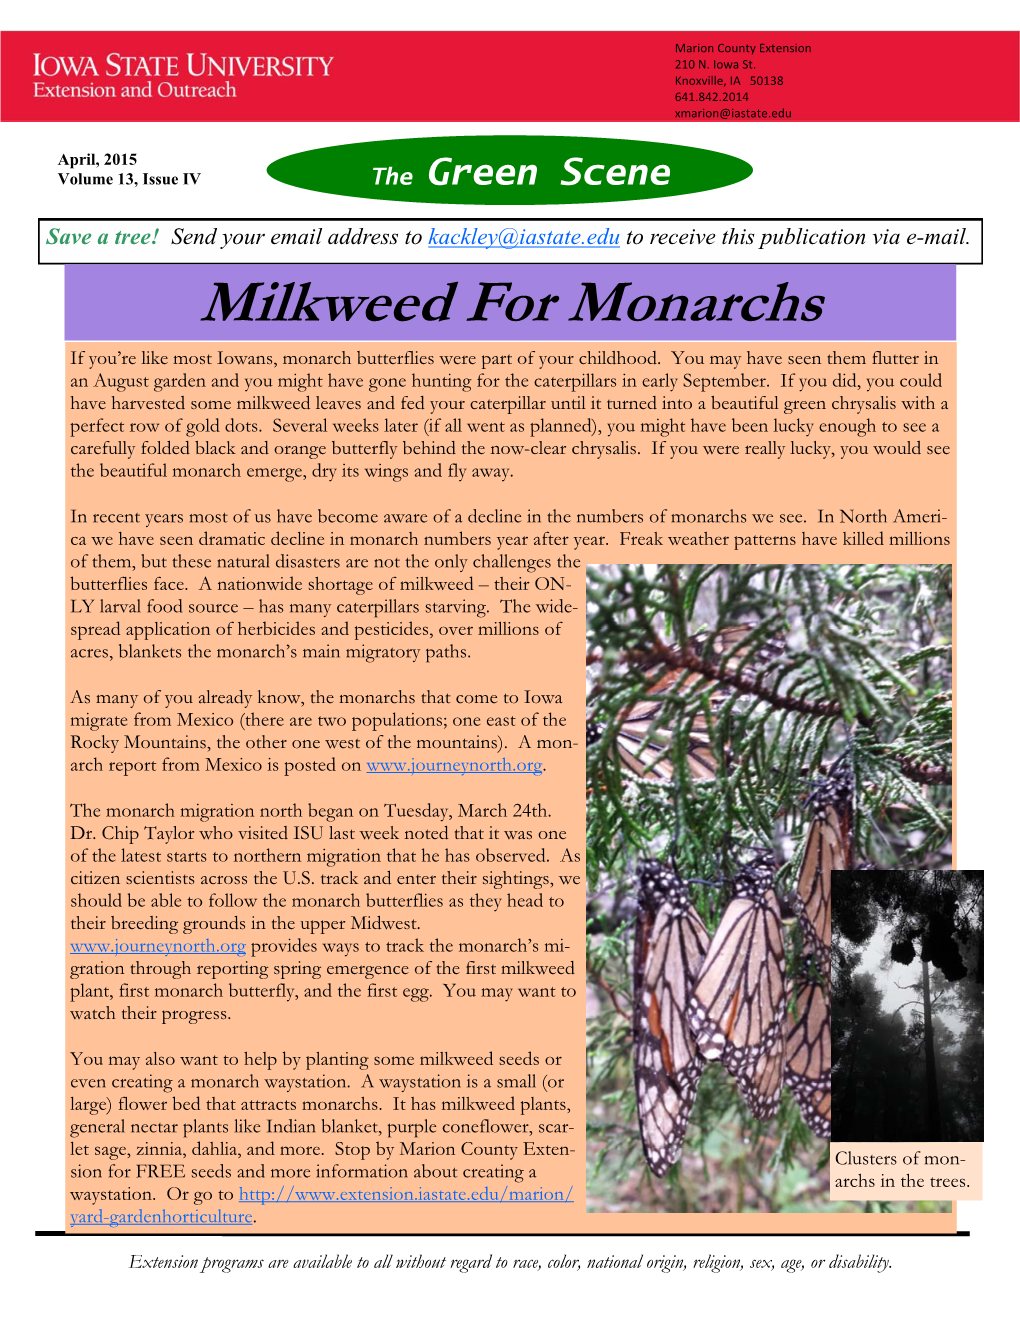 Milkweed for Monarchs If You’Re Like Most Iowans, Monarch Butterflies Were Part of Your Childhood